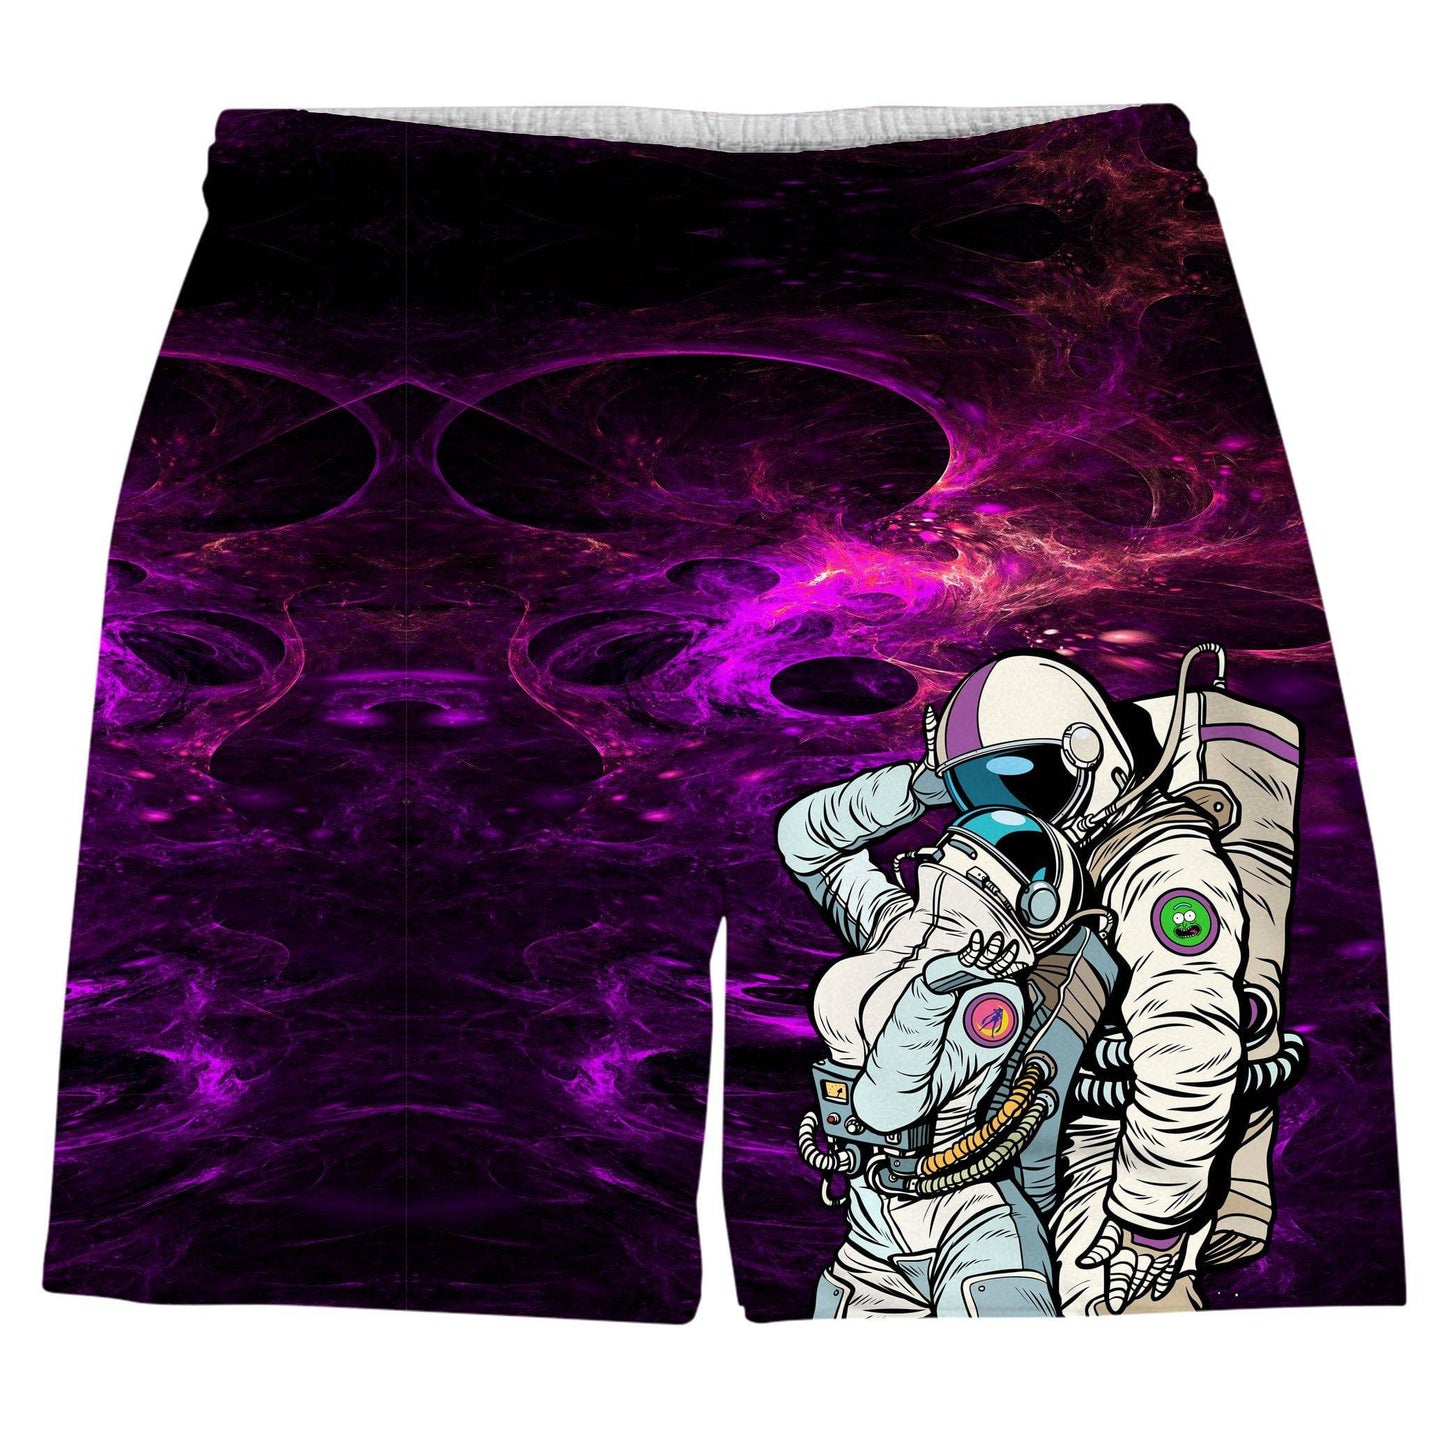 We Landed Weekend Shorts, Noctum X Truth, | iEDM